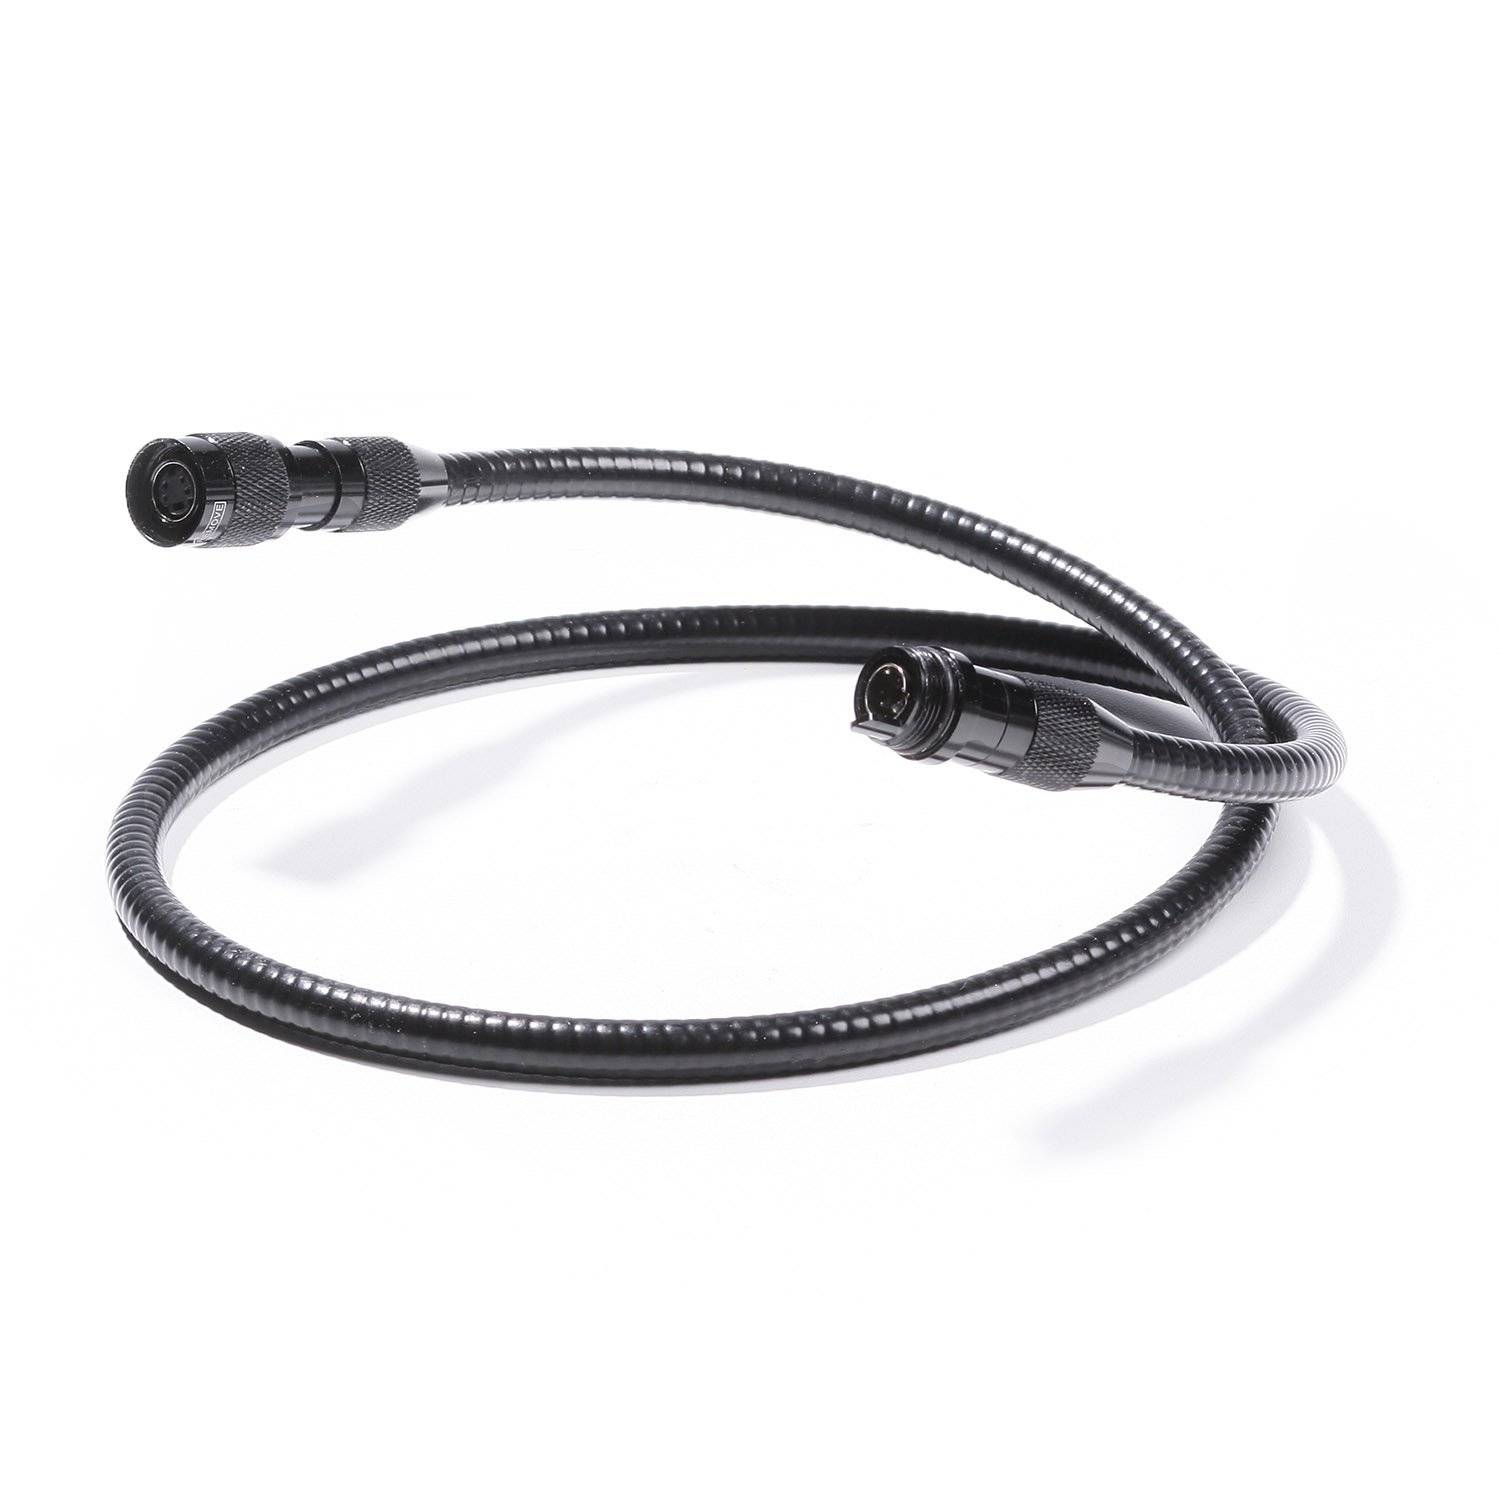 Whistler Search and Inspection Camera Extension Cable